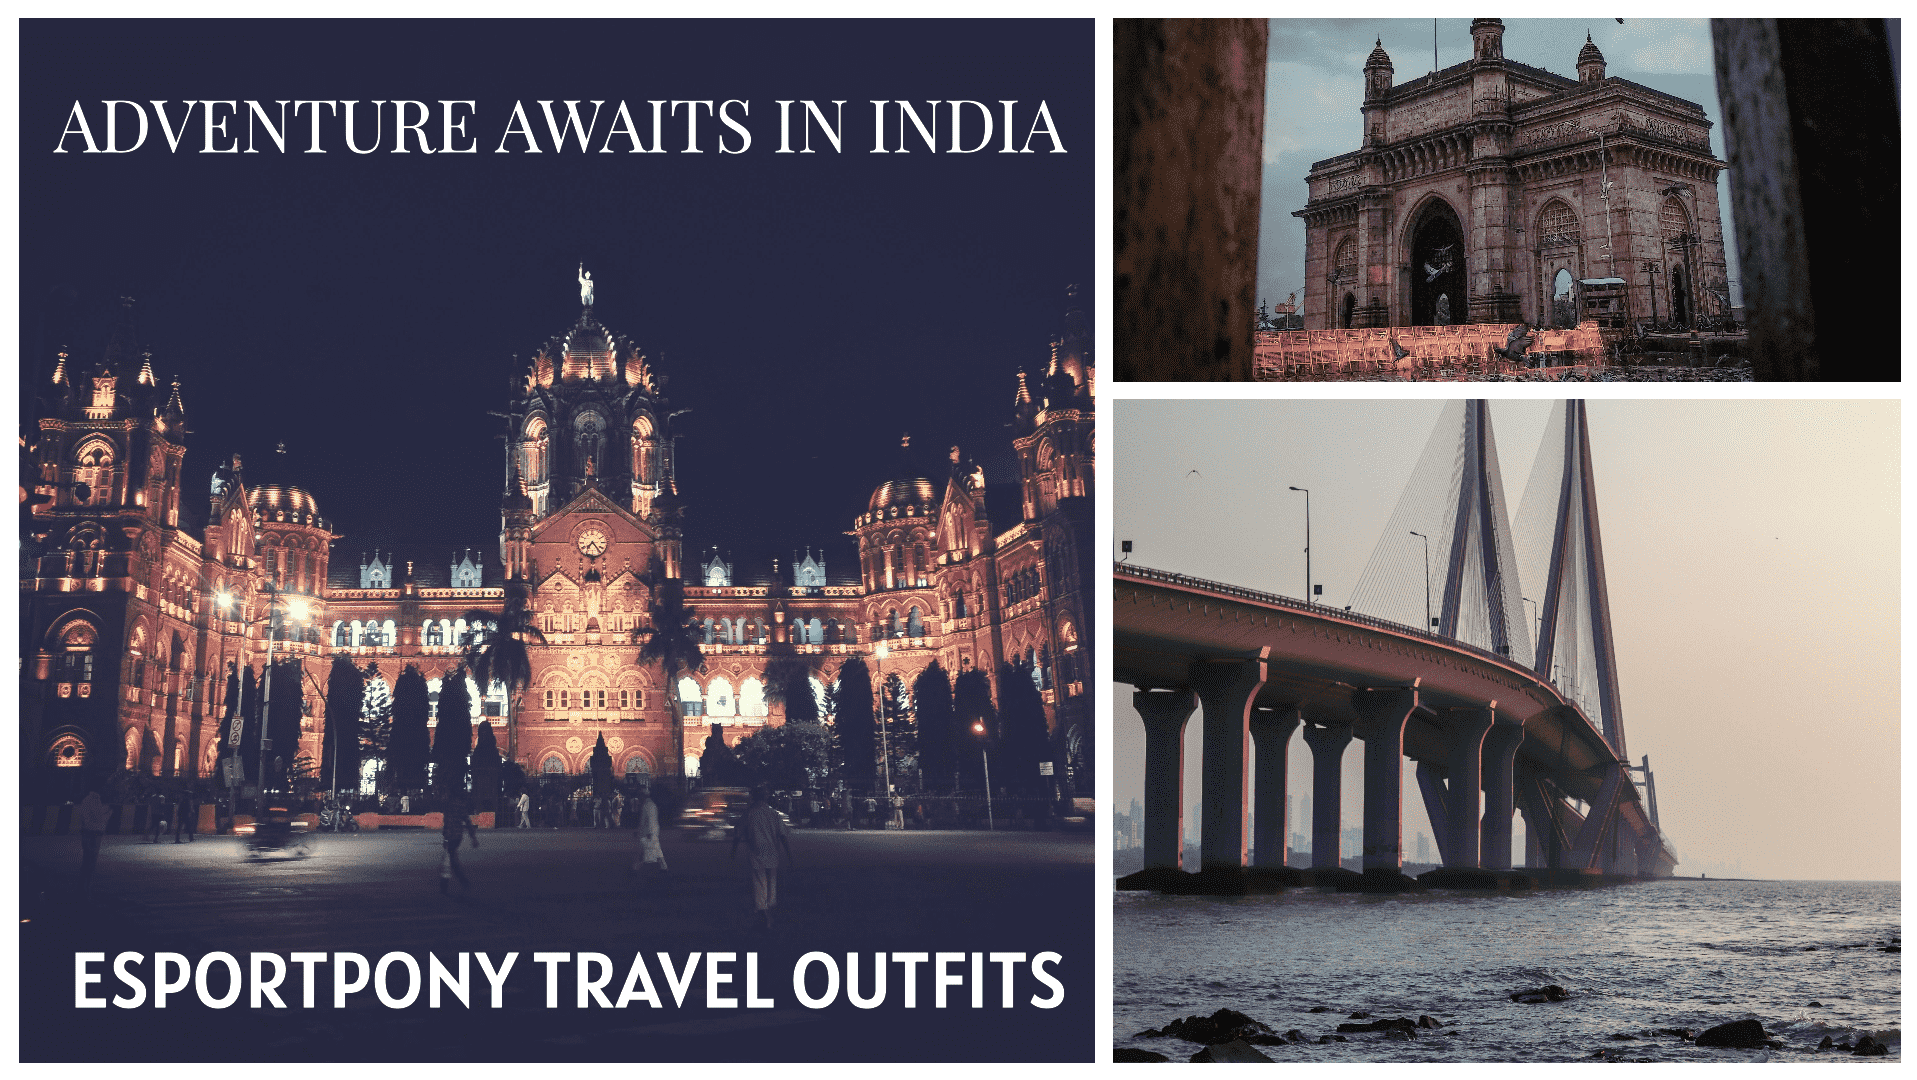 Adventure Awaits in India  Adventure Trip to India with Esportpony Travel Outfits